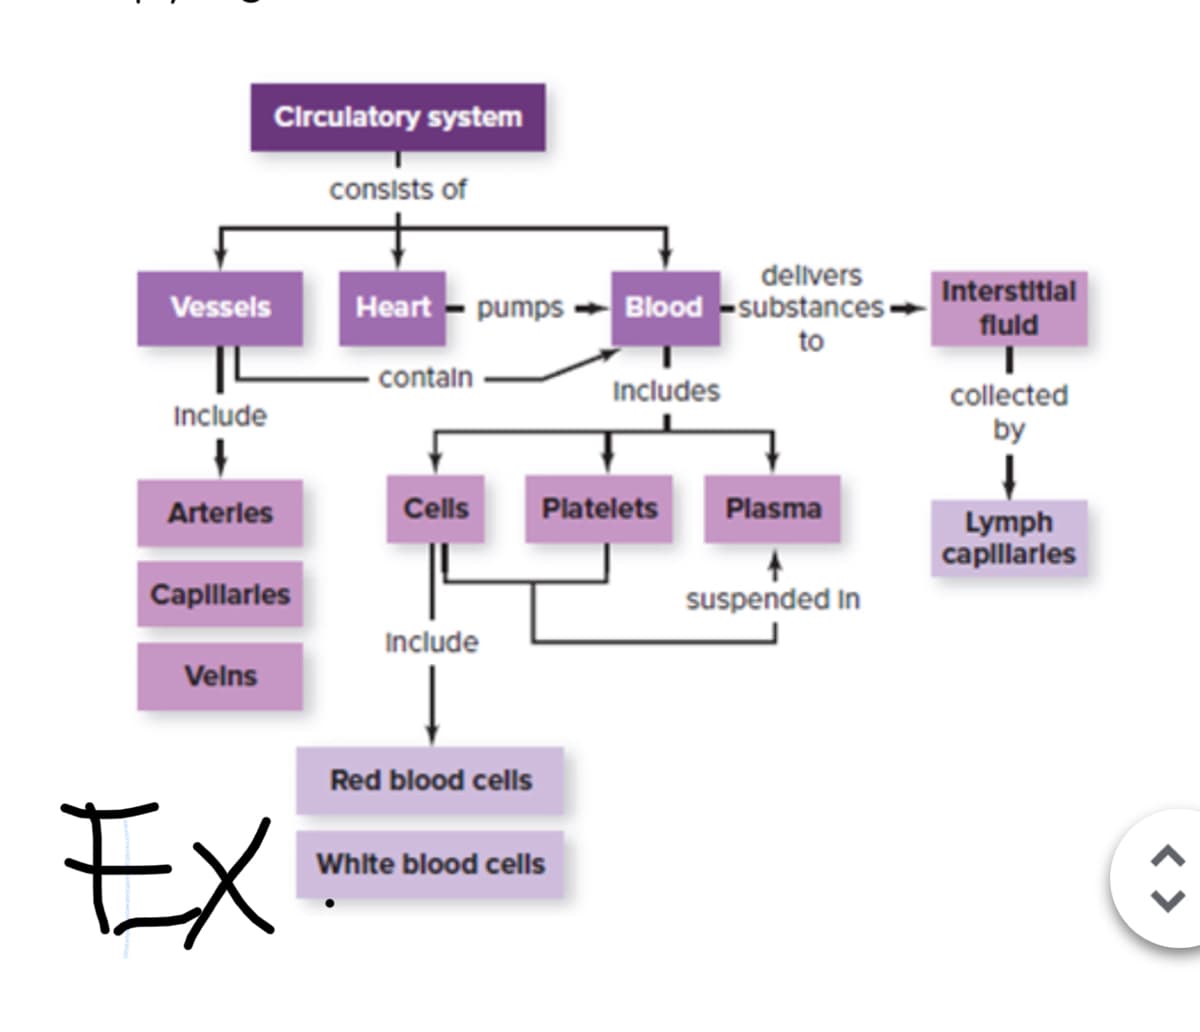 Clrculatory system
consists of
delivers
Interstitlal
Vessels
Heart - pumps
Blood -substances
fluld
to
contaln
Includes
collected
Include
by
Arterles
Cells
Platelets
Plasma
Lymph
caplllarles
Caplllarles
suspended In
Include
Velns
Red blood cells
EX
White blood cells
